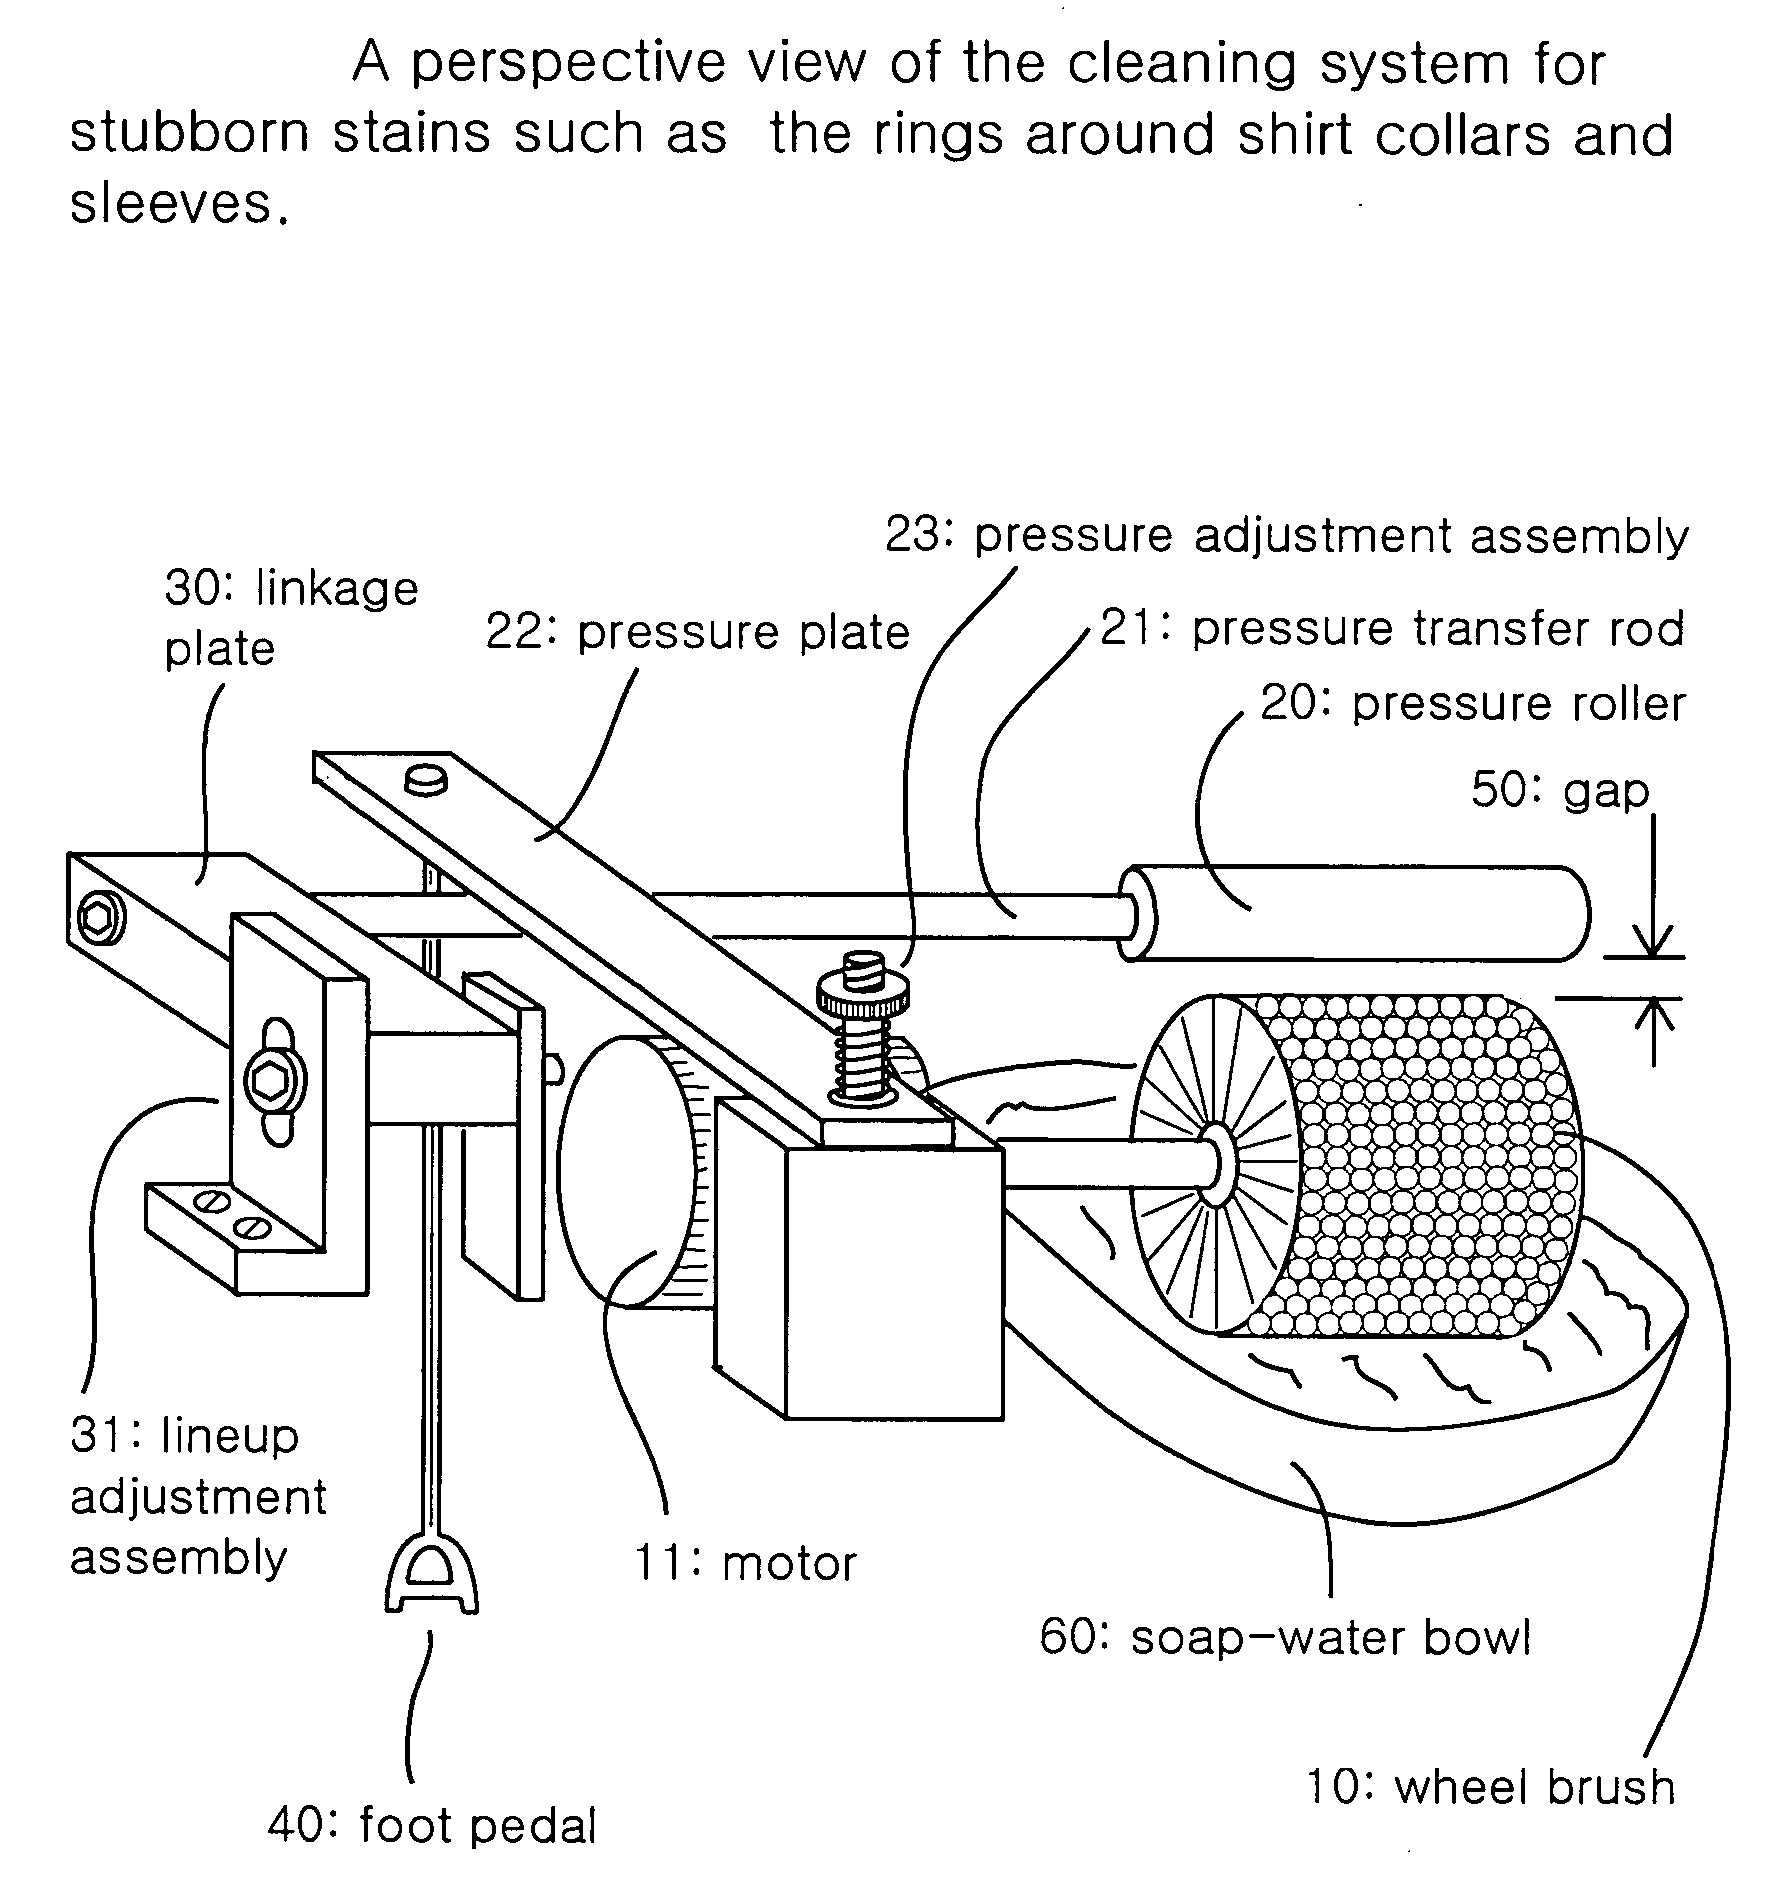 Cleaning system for shirt collar and sleeves